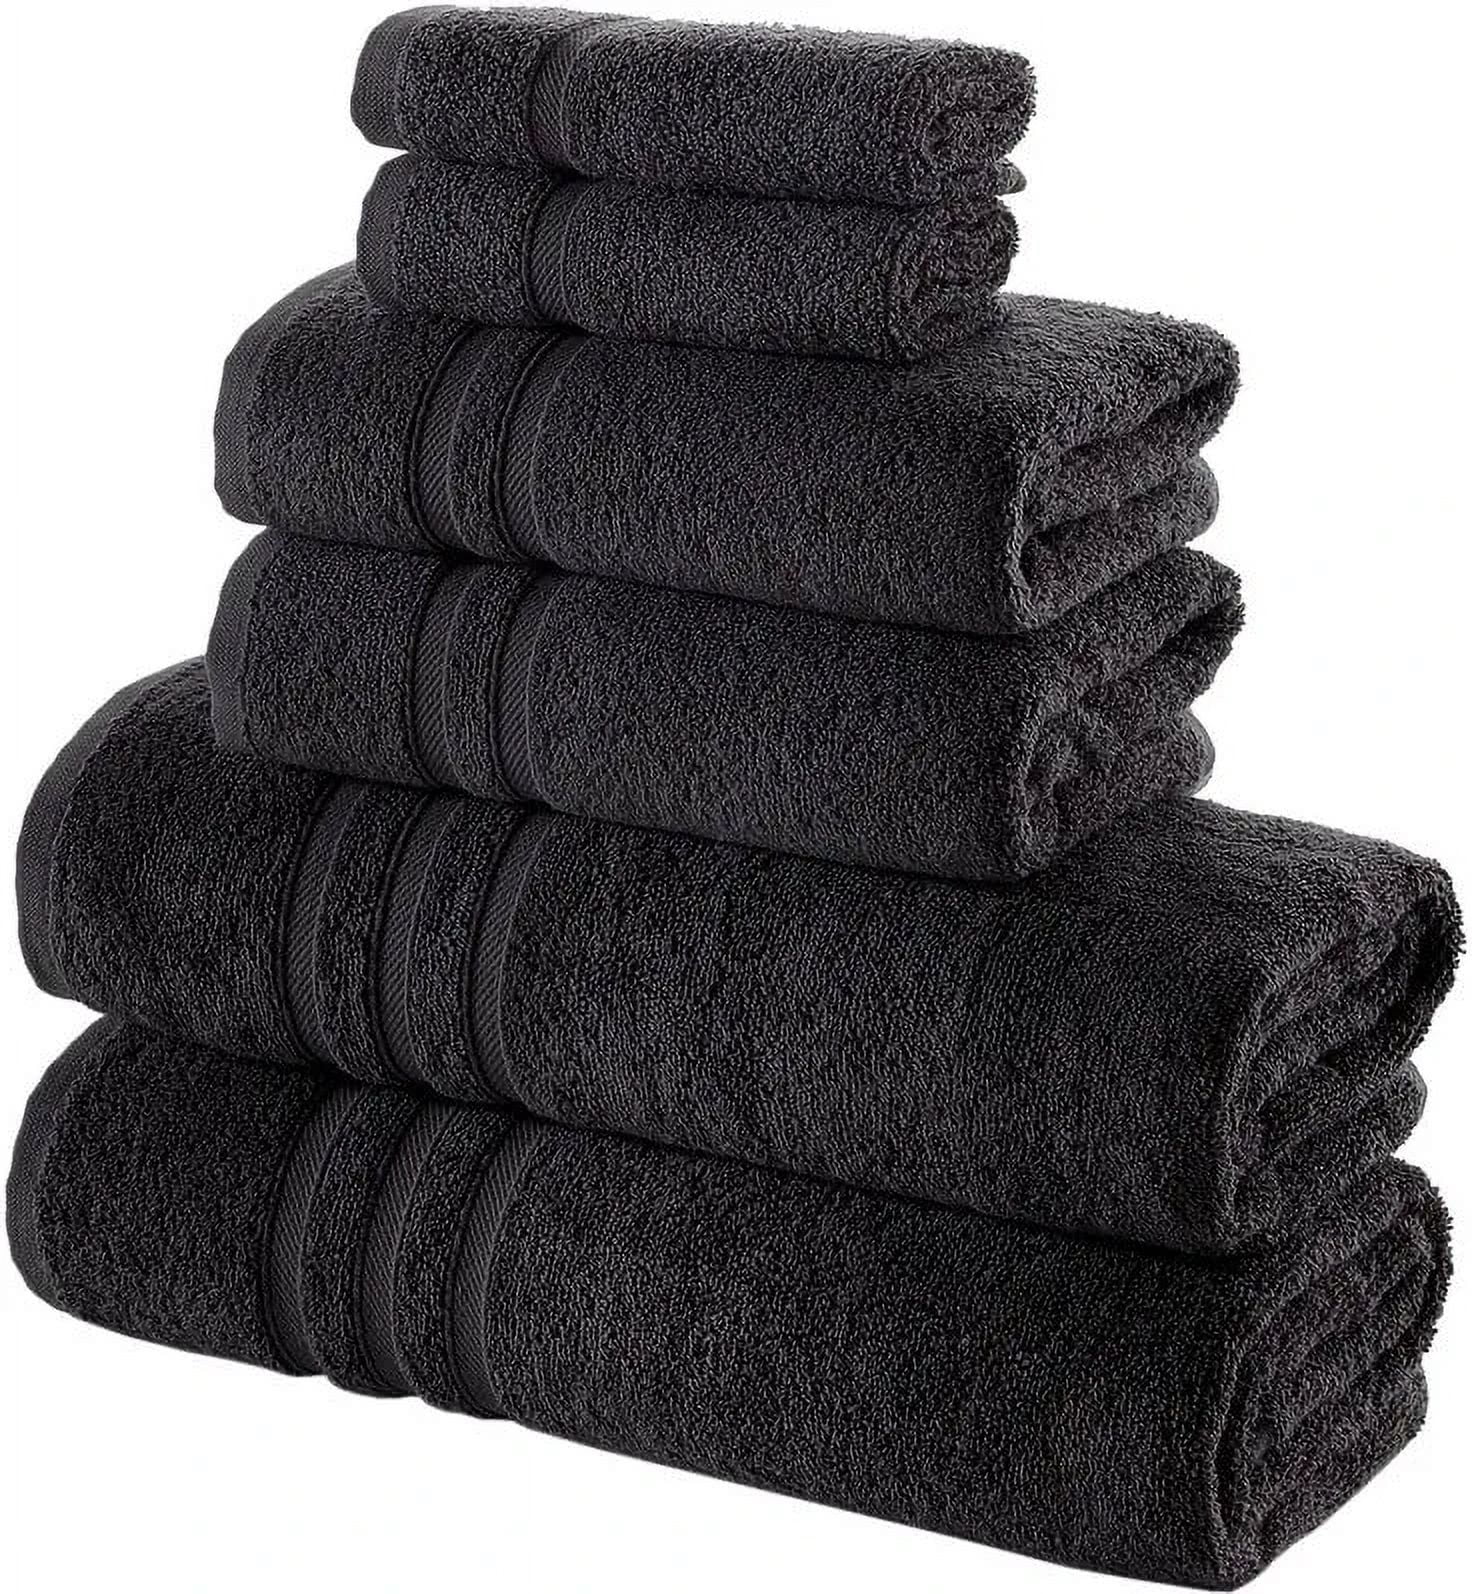  Luxury Turkish Towels Bathroom Sets Clearance 6 Piece Bath Towel  Set - 2 Bath Towels, 2 Hand Towels, 2 Washcloths, Super Soft Highly  Absorbent Grey : Home & Kitchen